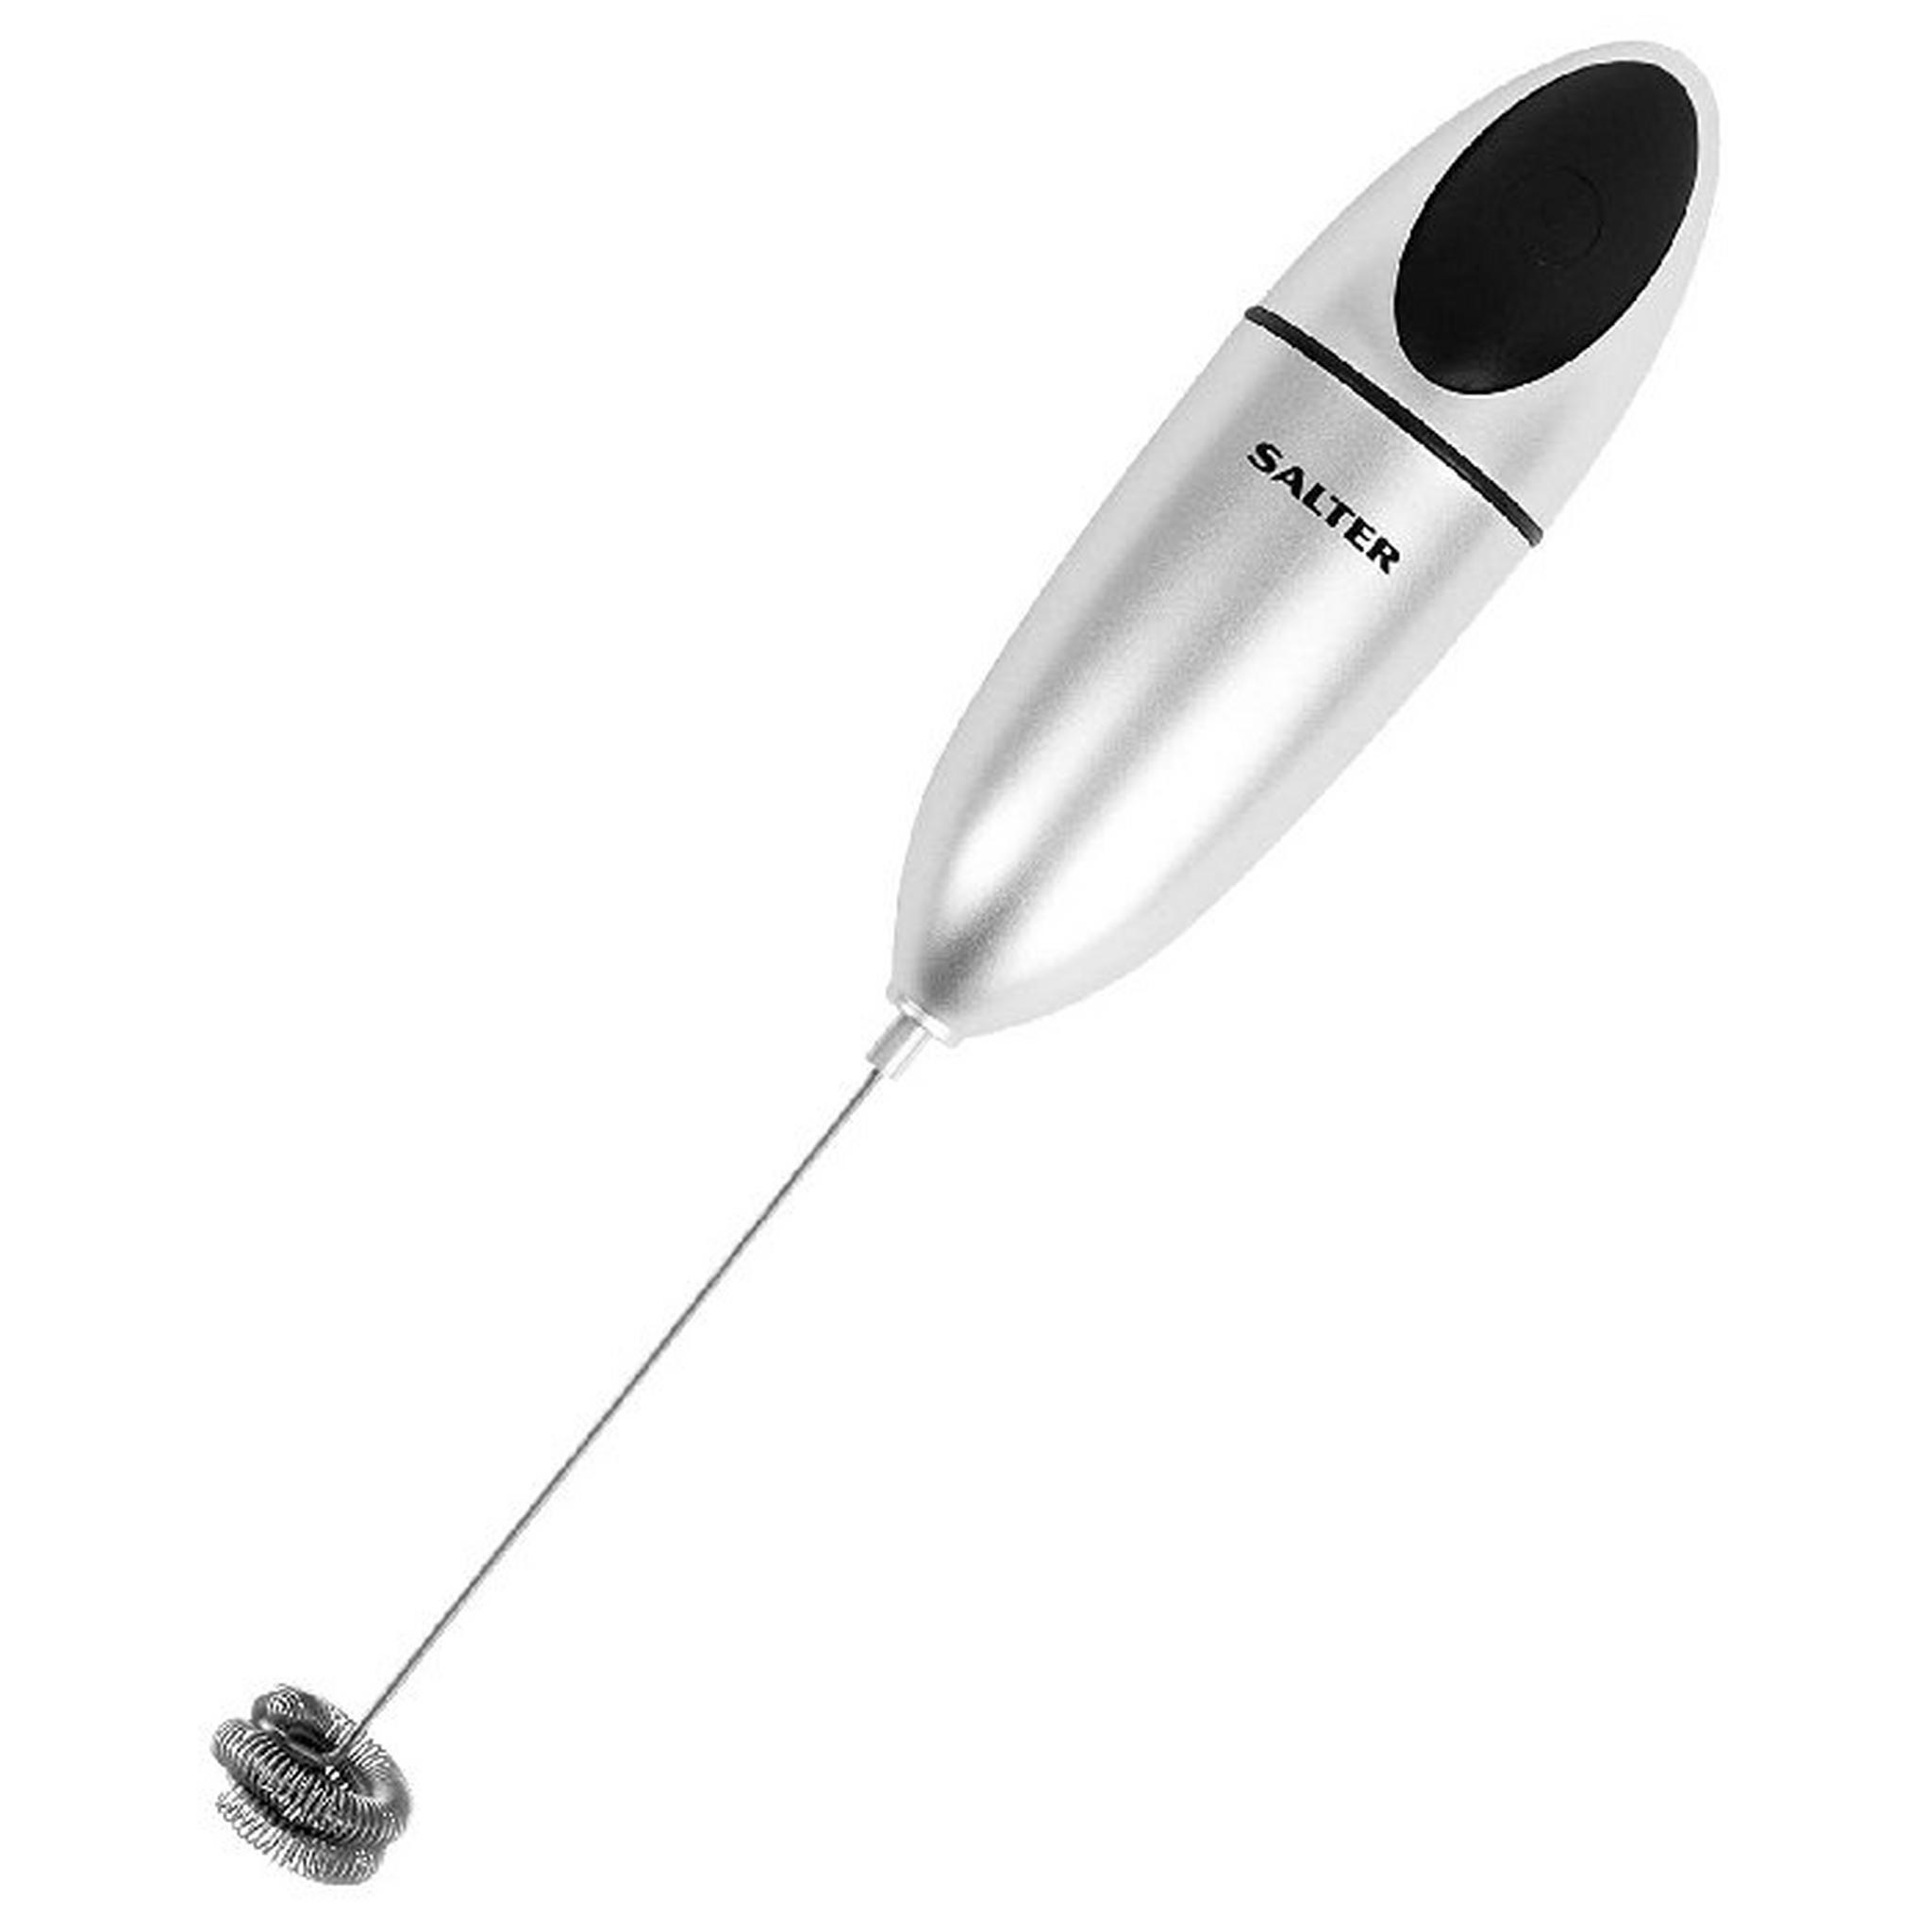 Handheld Electronic Milk Frother with Double Coil Whisk, 546 CRXR - Silver